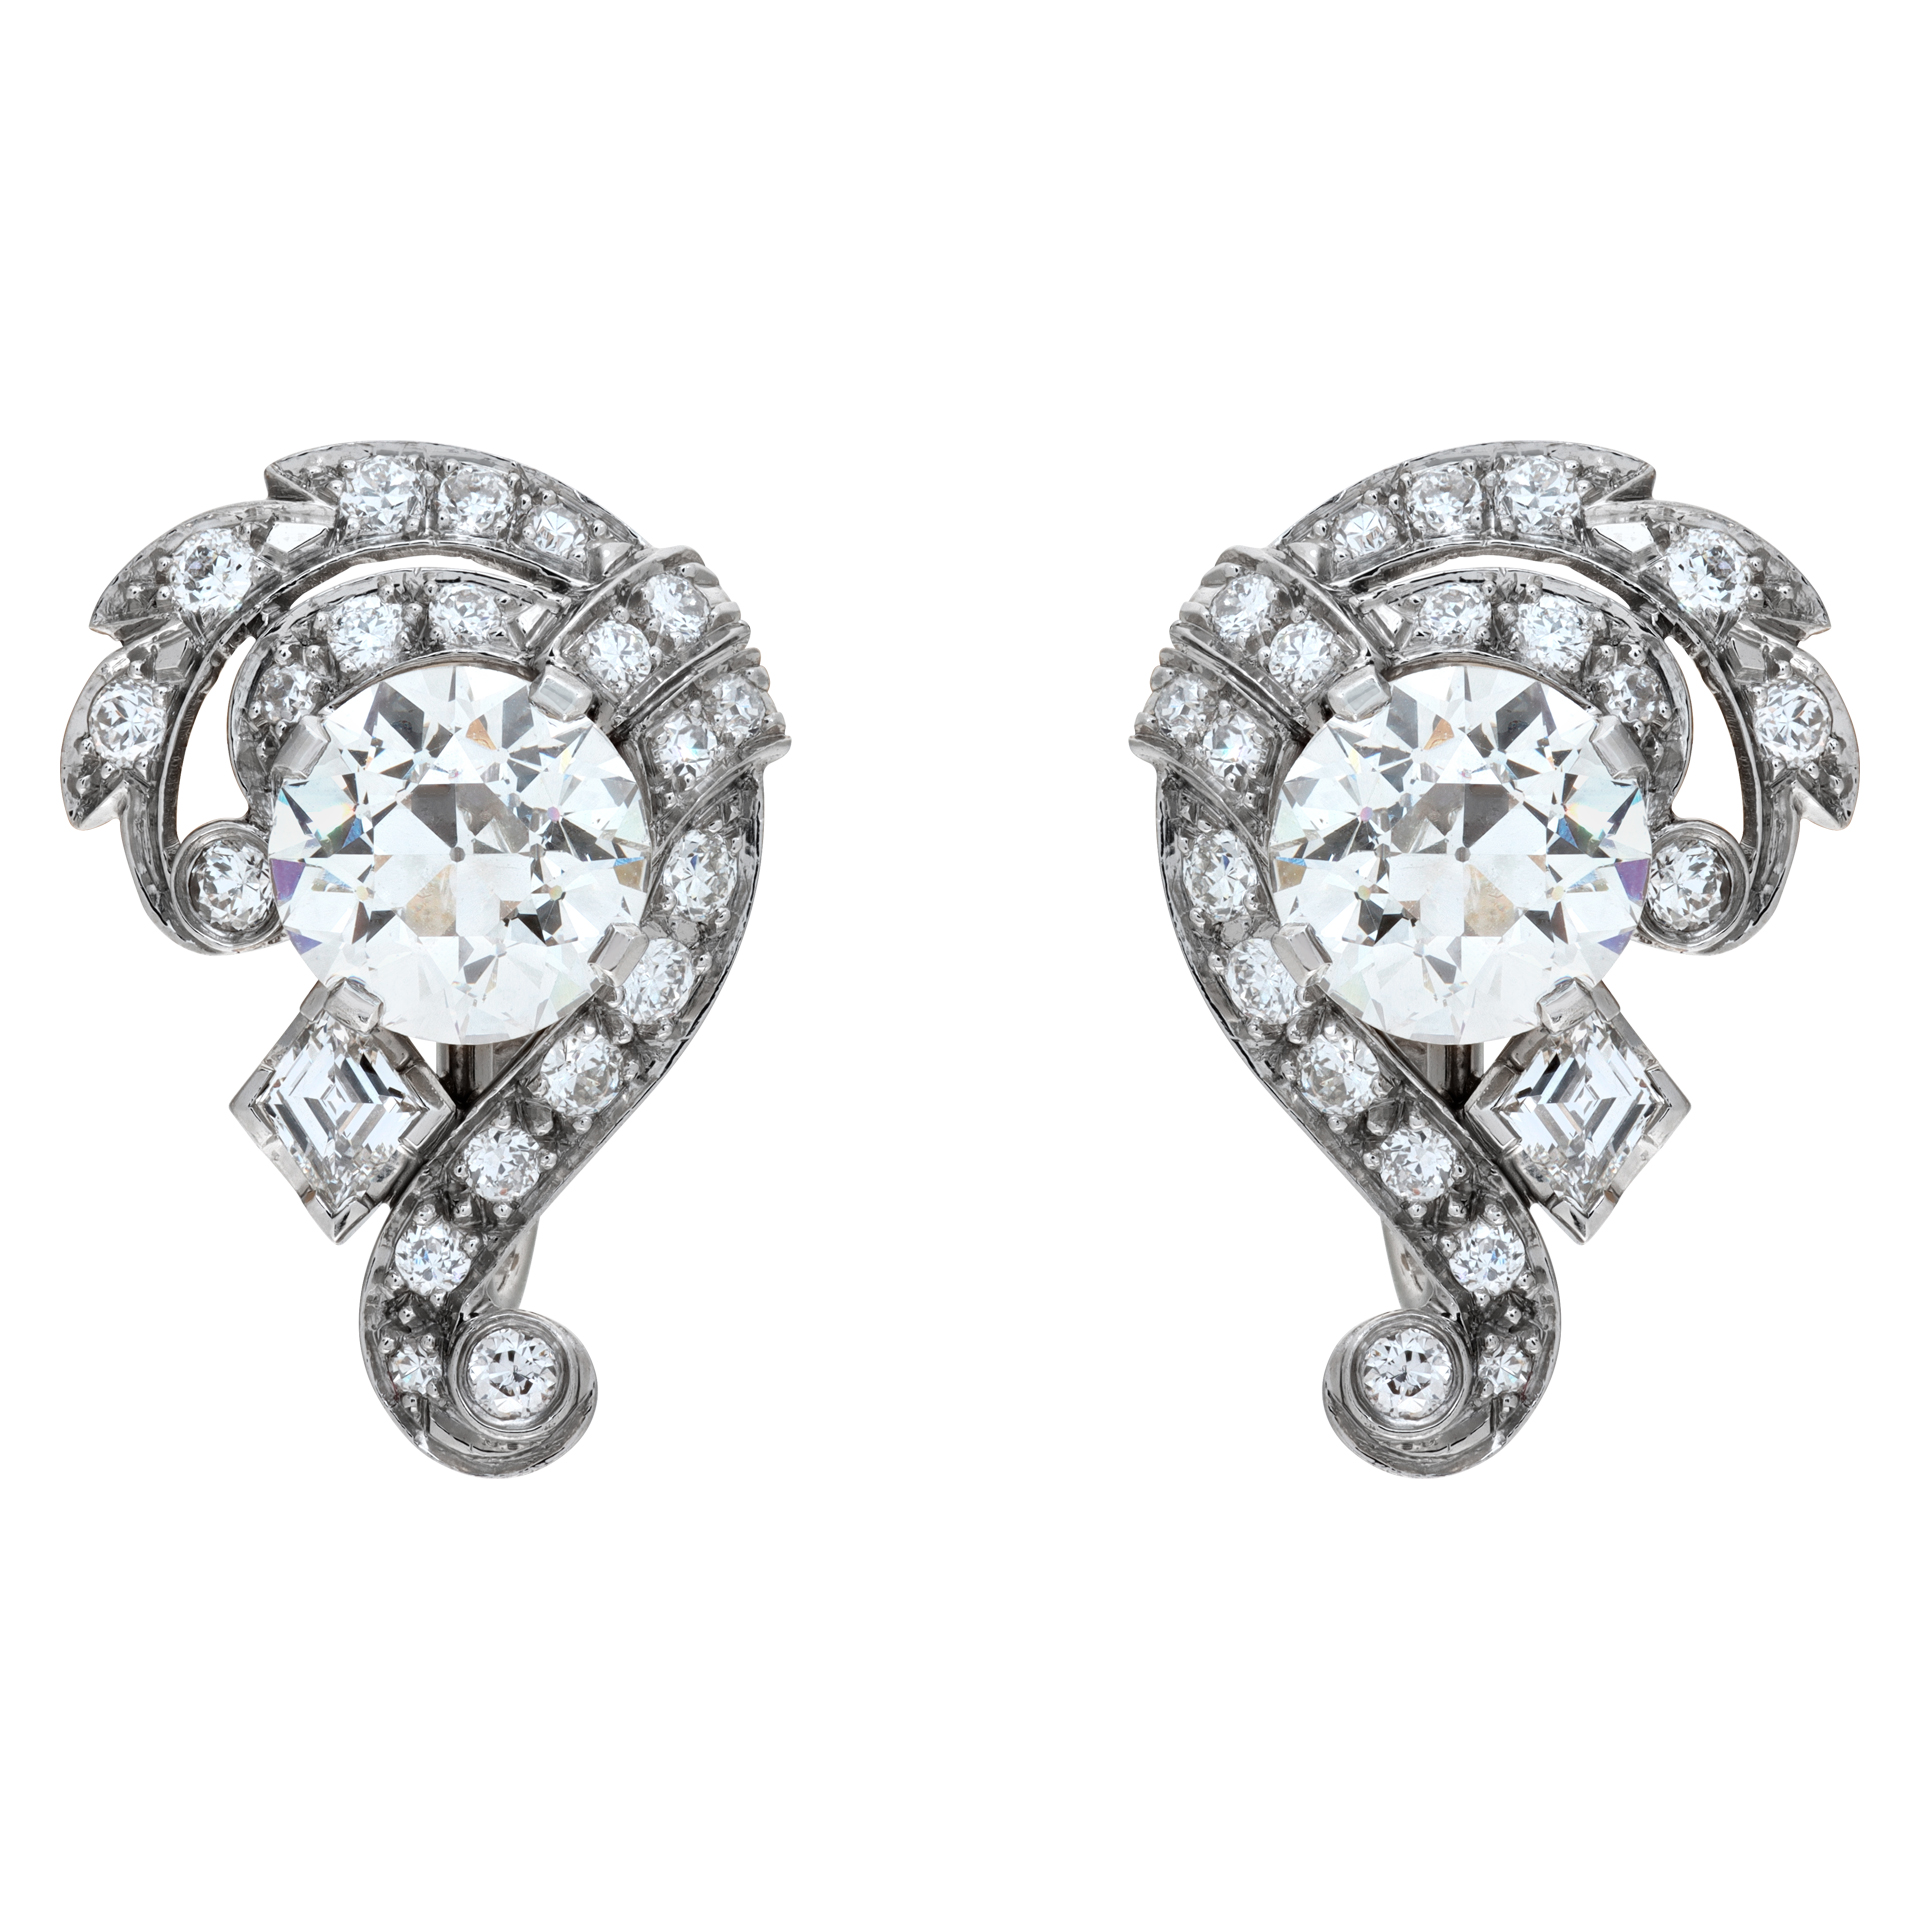 Vintage diamond earrings with approx. 1.48 carat each center diamond in platinum with 14k white gold closing system